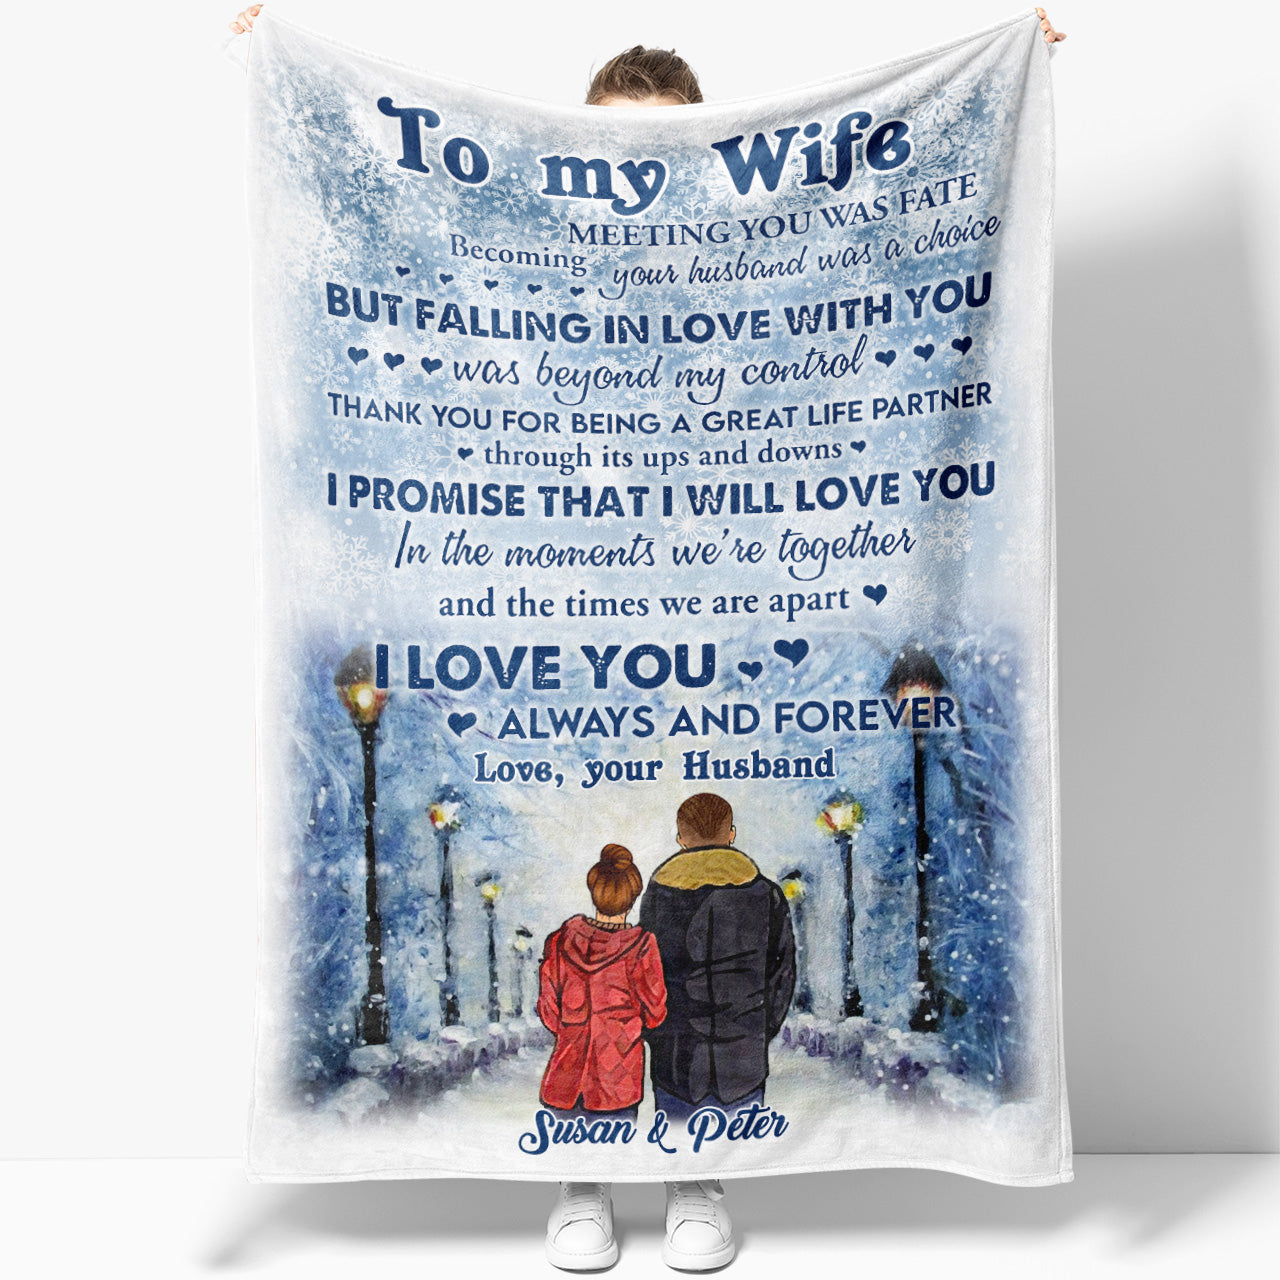 Personalized Winter Christmas Blanket Gift Ideas for Wife, Customized Anniversary Blanket for Her, Falling in Love With You Blanket Birthday for Wife